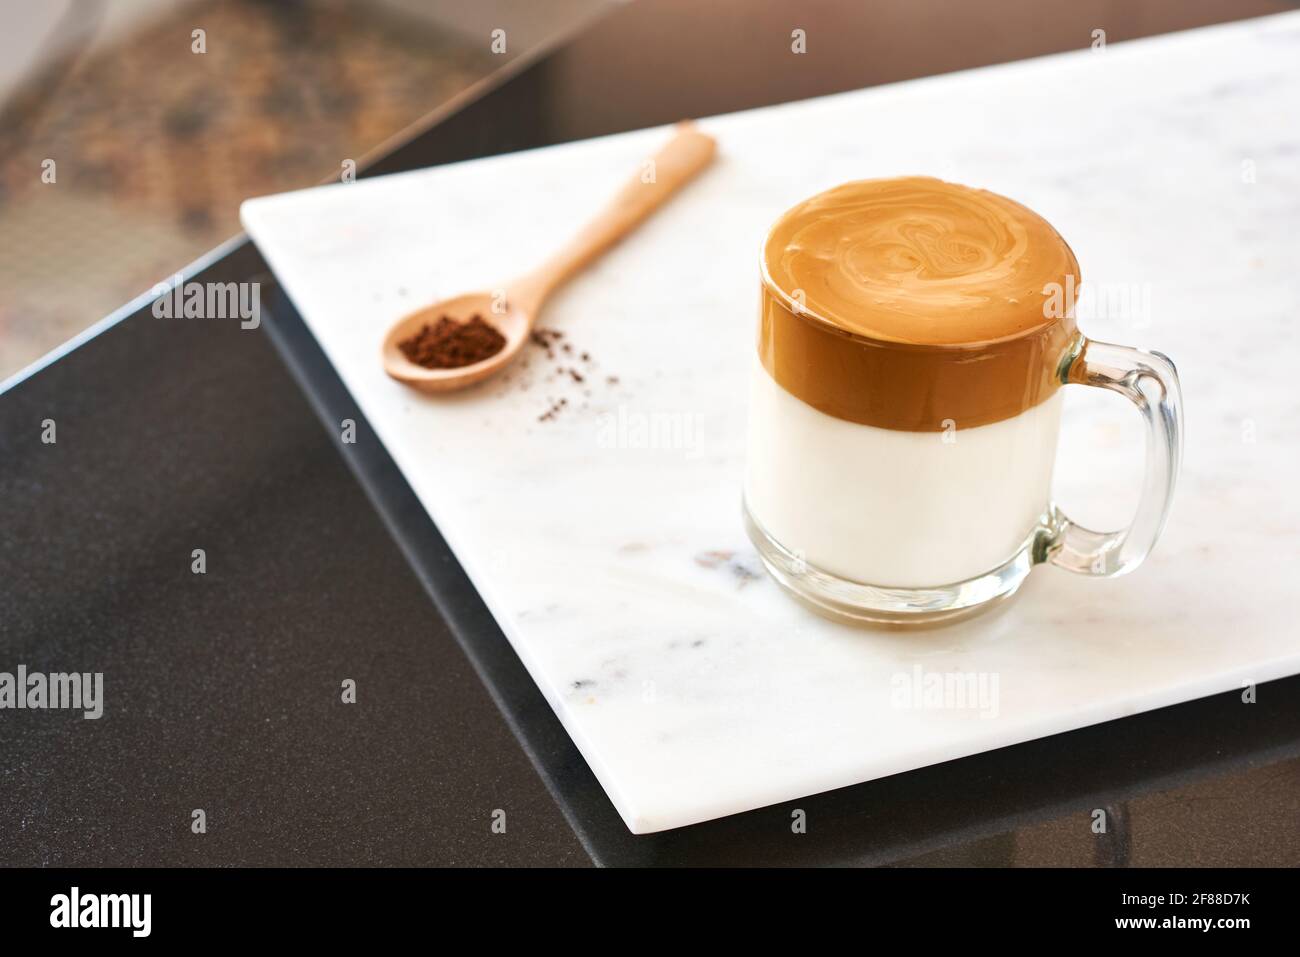 Dalgona coffee, fluffy creamy shake coffee in a transparent glass on a marble background next to a wooden spoon. Very popular in Korea. Stock Photo